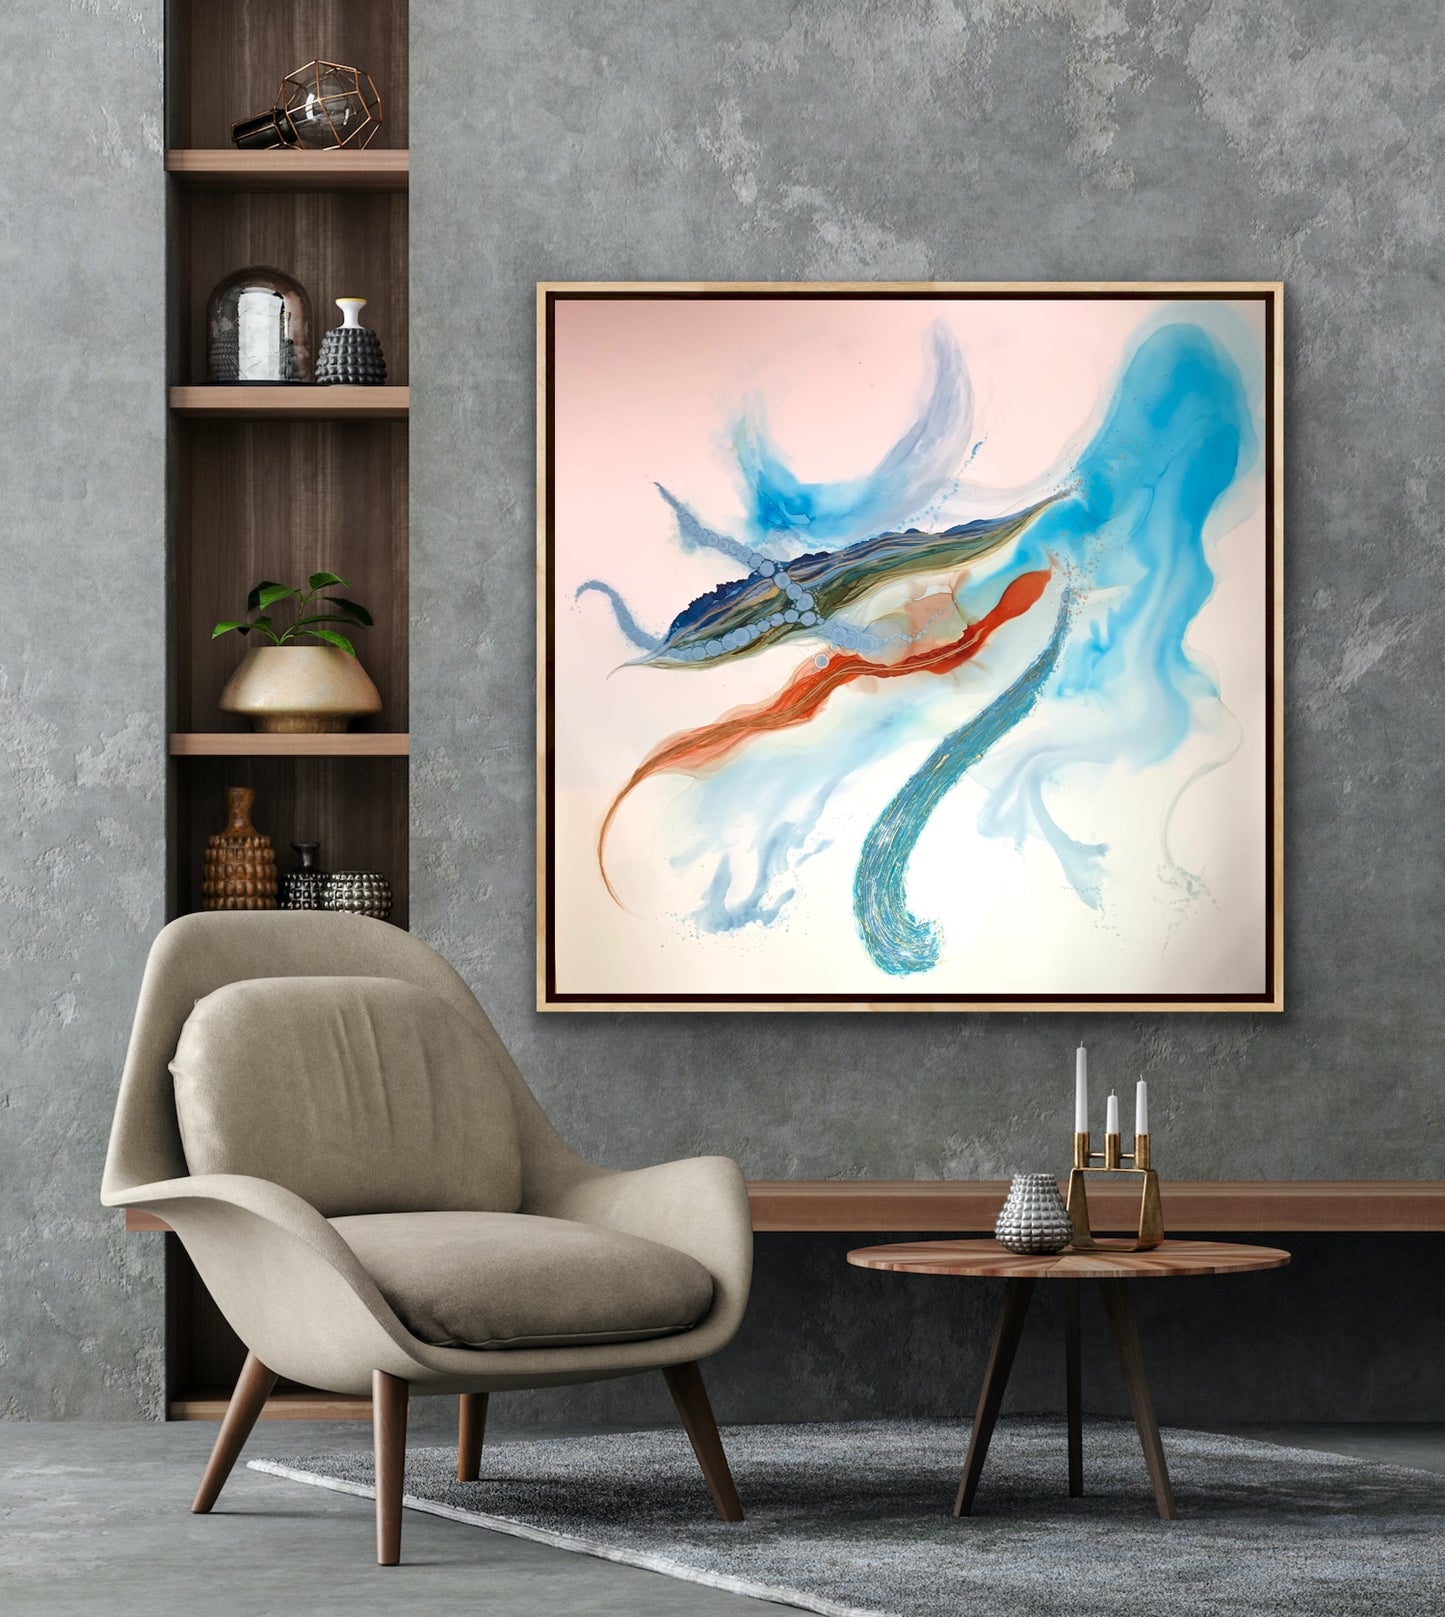 The Inlet - large abstract statement art.